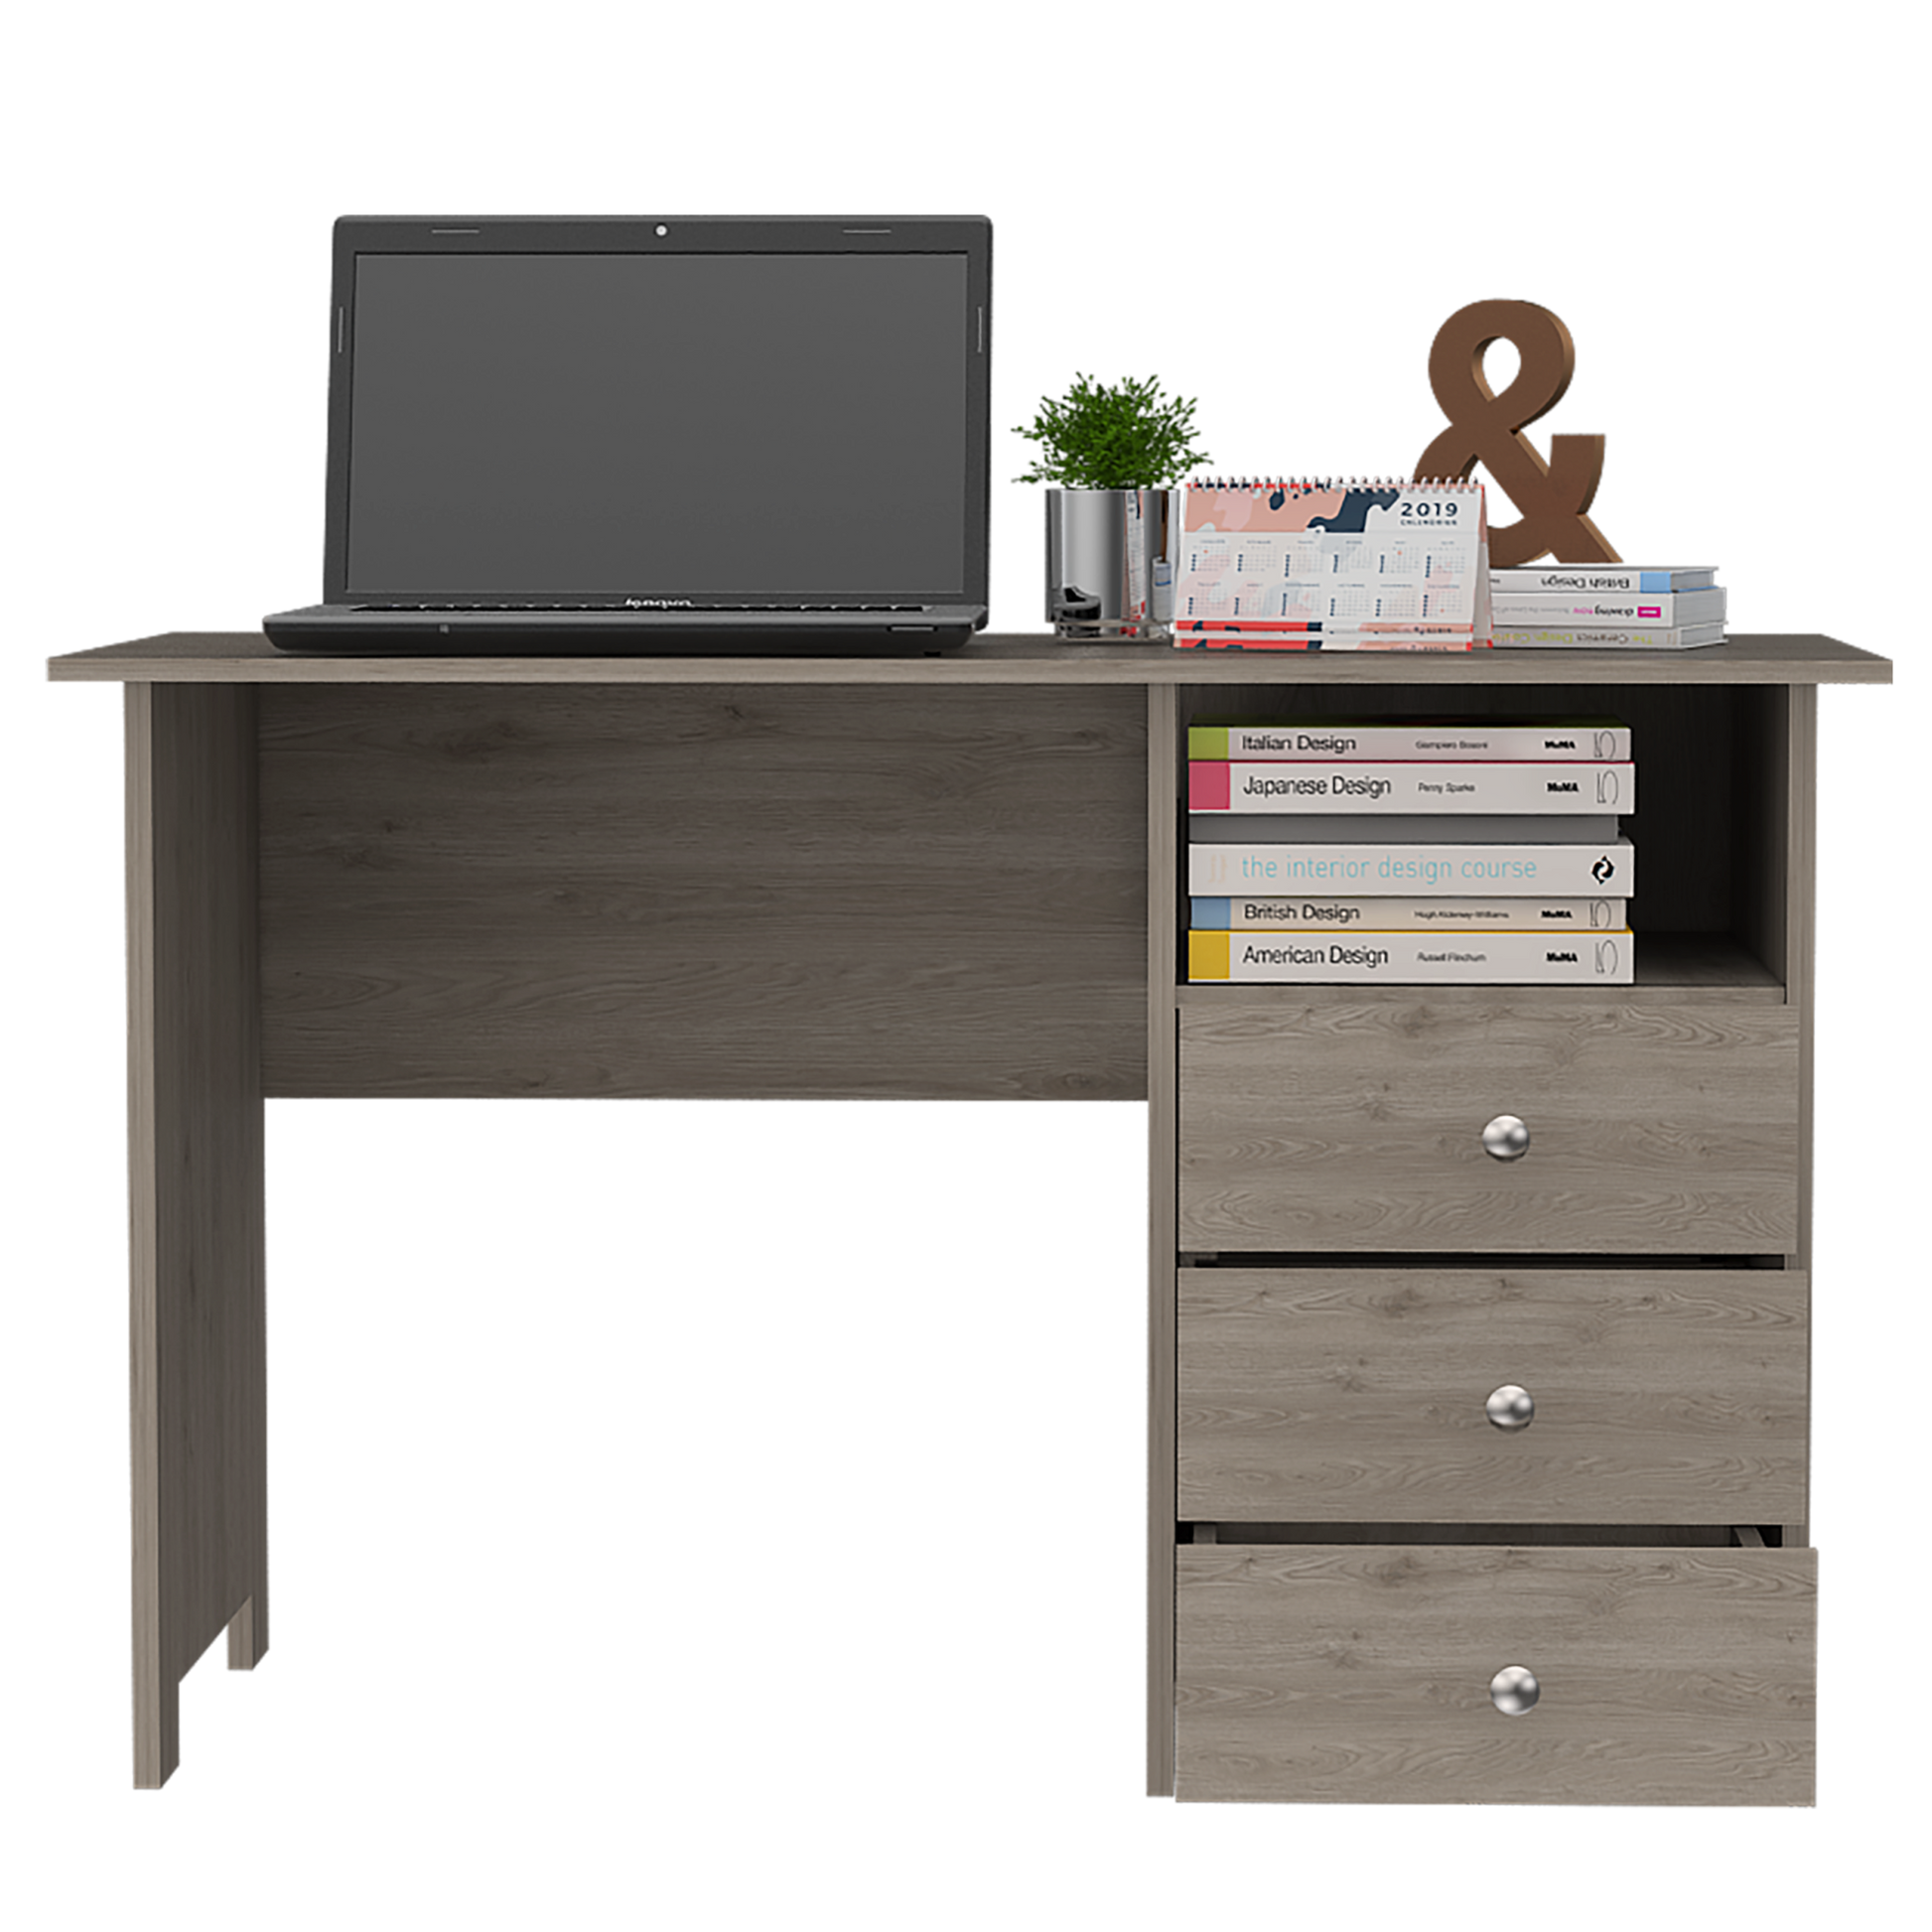 Tampa Computer Desk With 2 Drawers - Beige